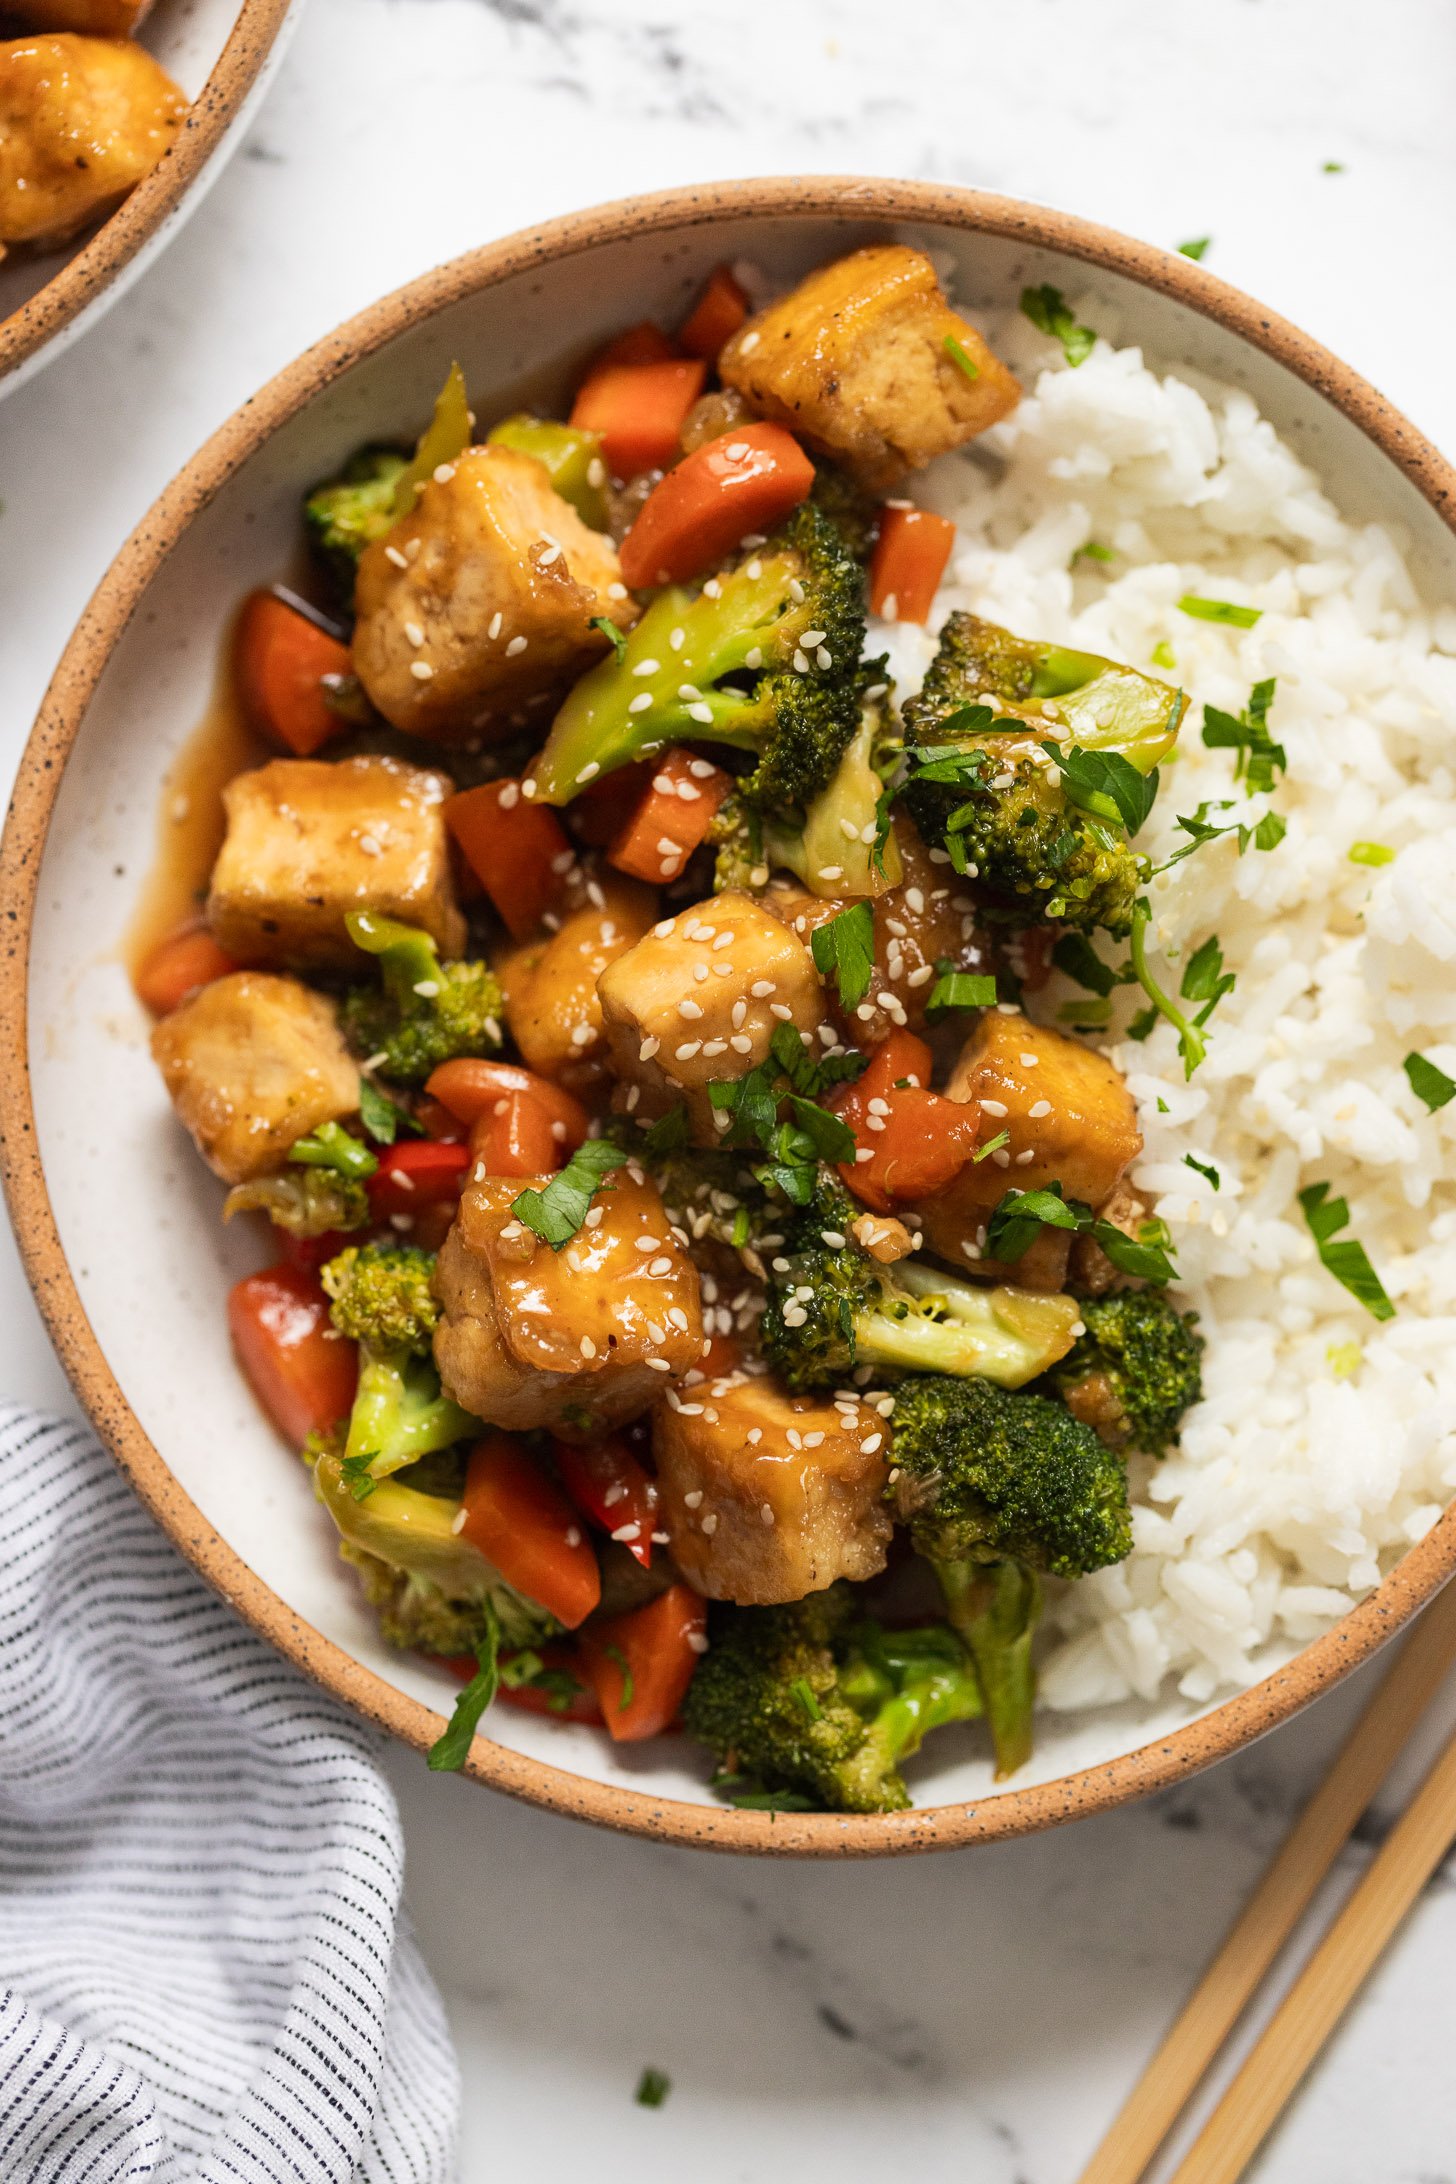 Bowl of stir fry with vegetables and tofu over rice.